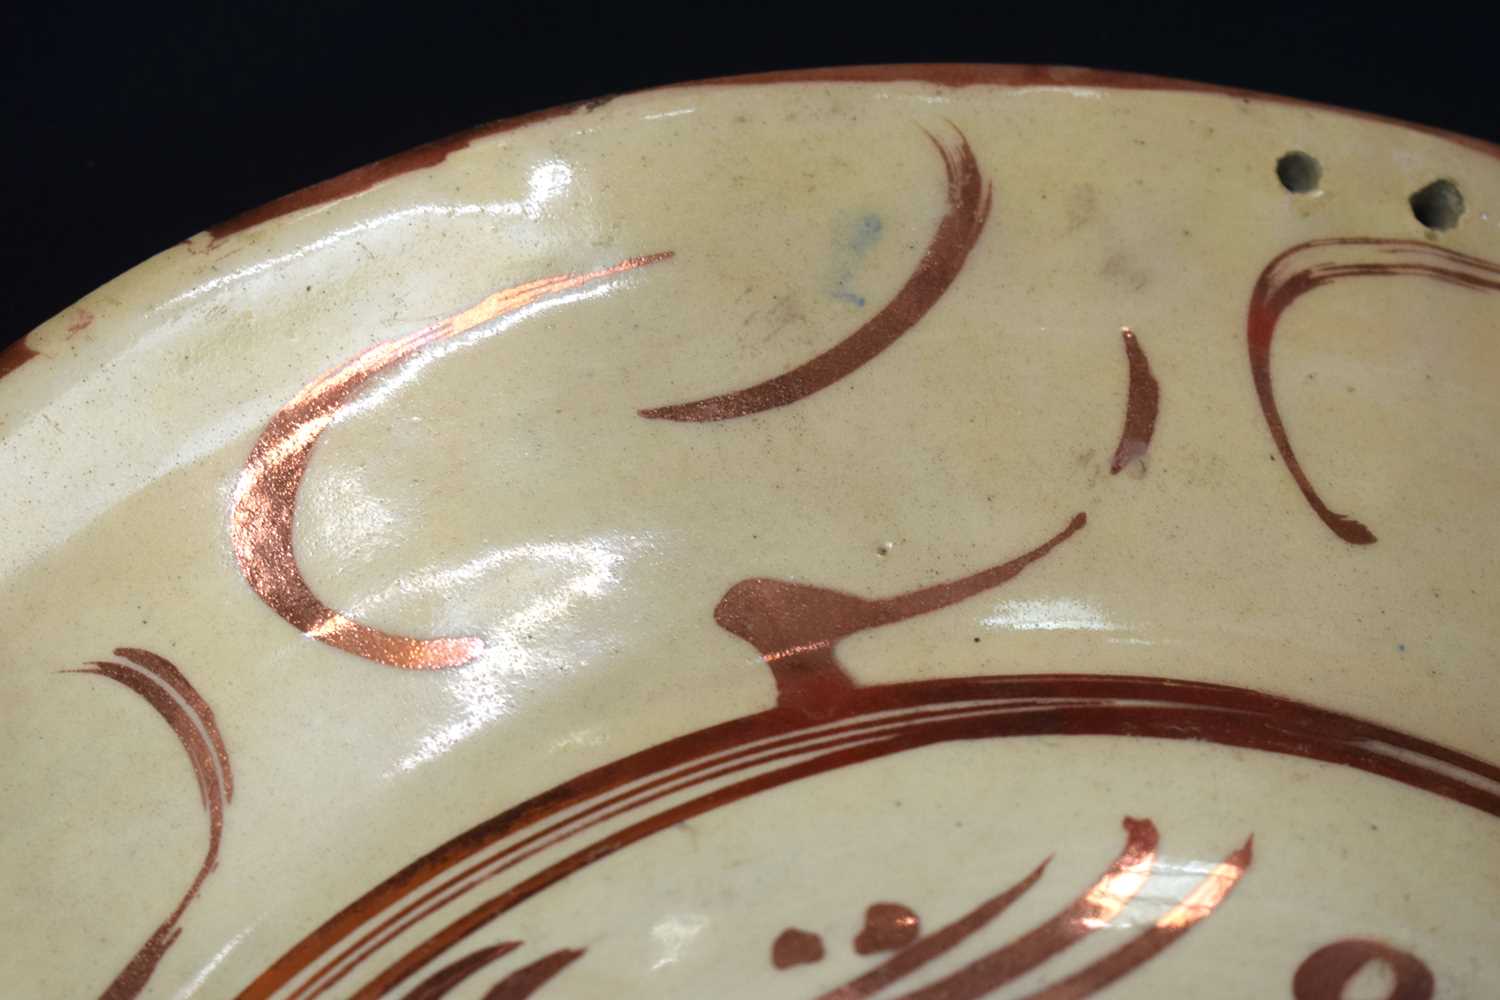 A LARGE EARLY SPANISH HISPANO MORESQUE POTTERY DISH painted with leaves and motifs. 35 cm diameter. - Image 11 of 17